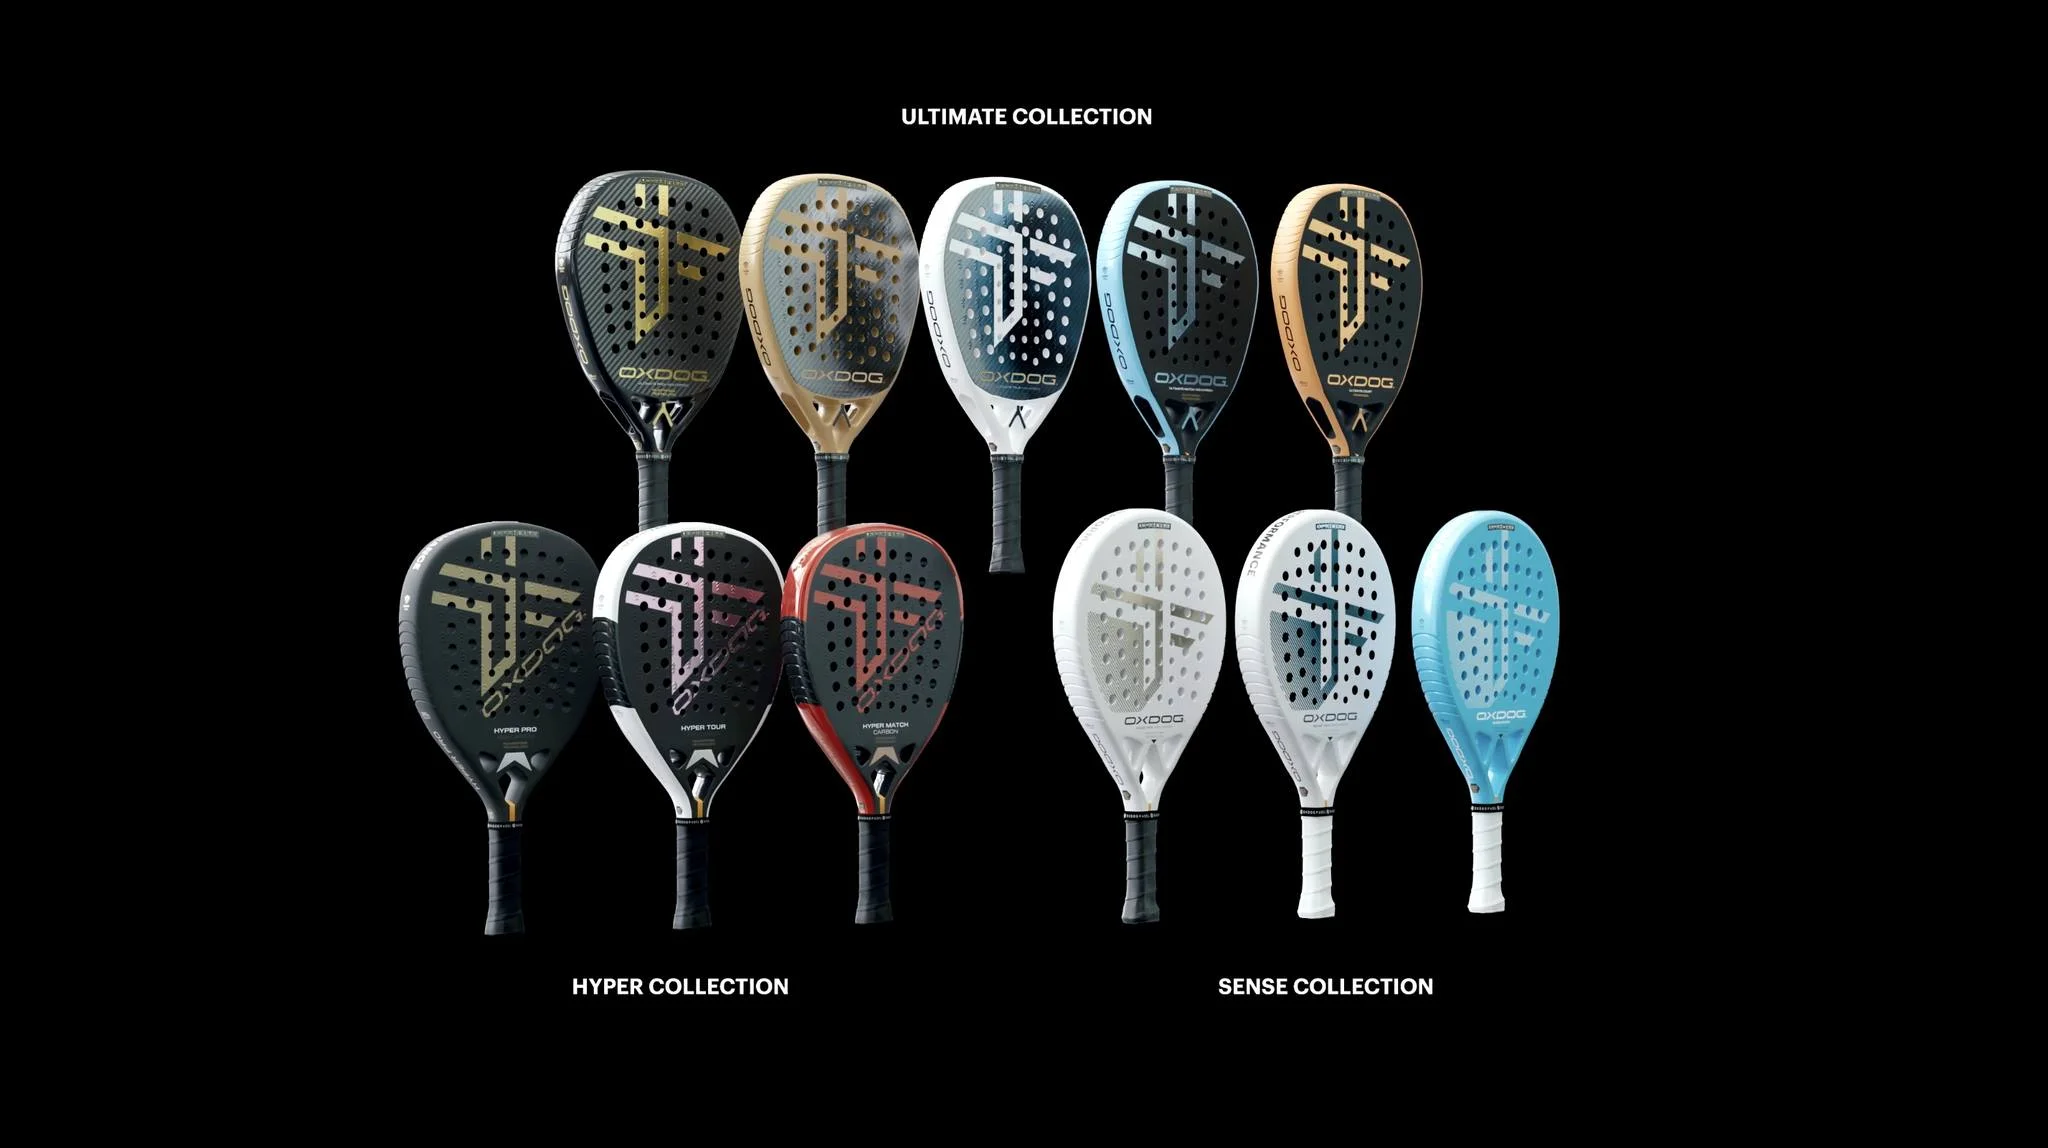 personal Brisa desmayarse Oxdog: the first collection of palas is here | Padel Magazine